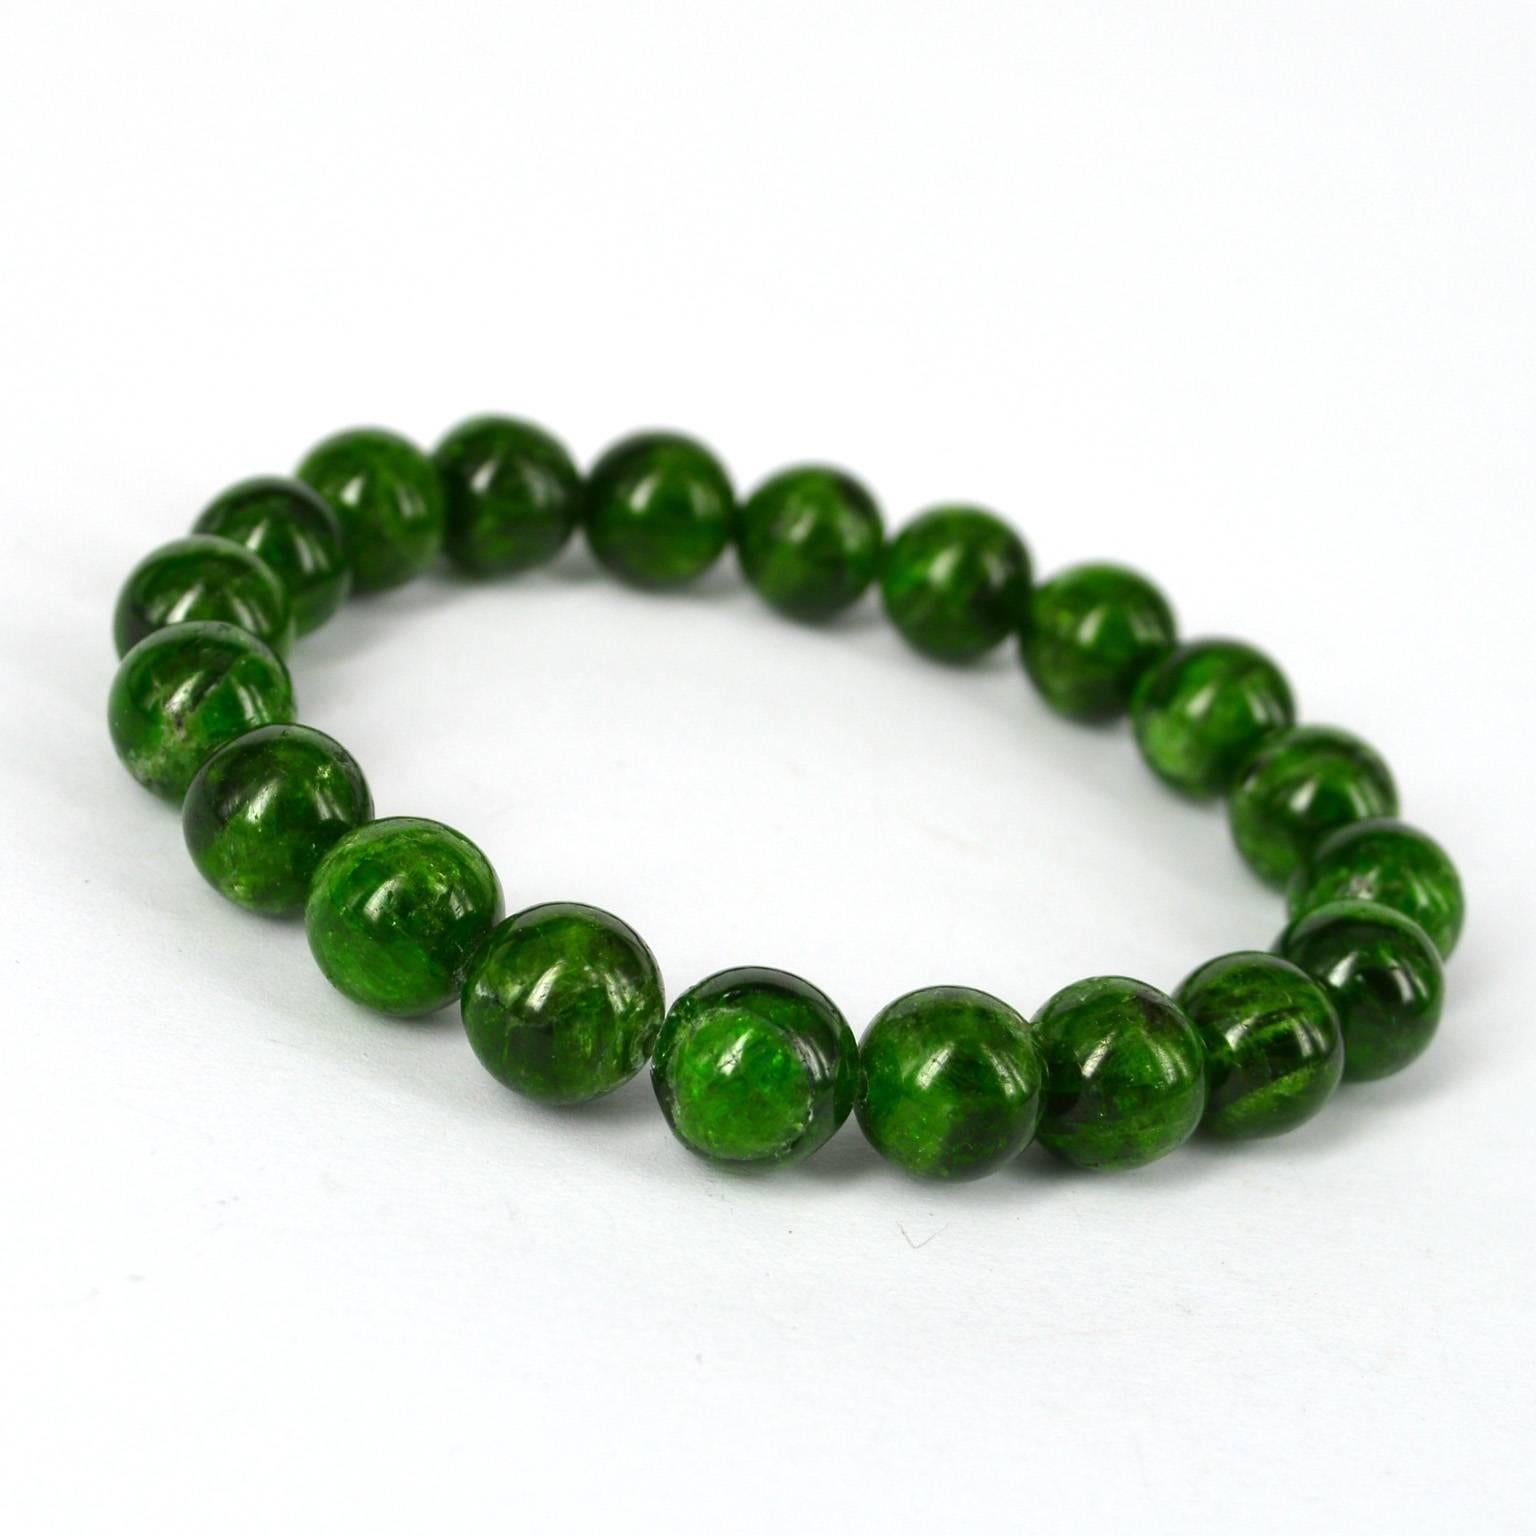 Chrome Diopside bracelet threaded on elastic.
20 x 10mm beads

Chrome diopside is a chromium-rich, transparent to translucent variety of gemstone-quality calcium magnesium silicate. It is one of the rarer varieties of diopside and belongs to the